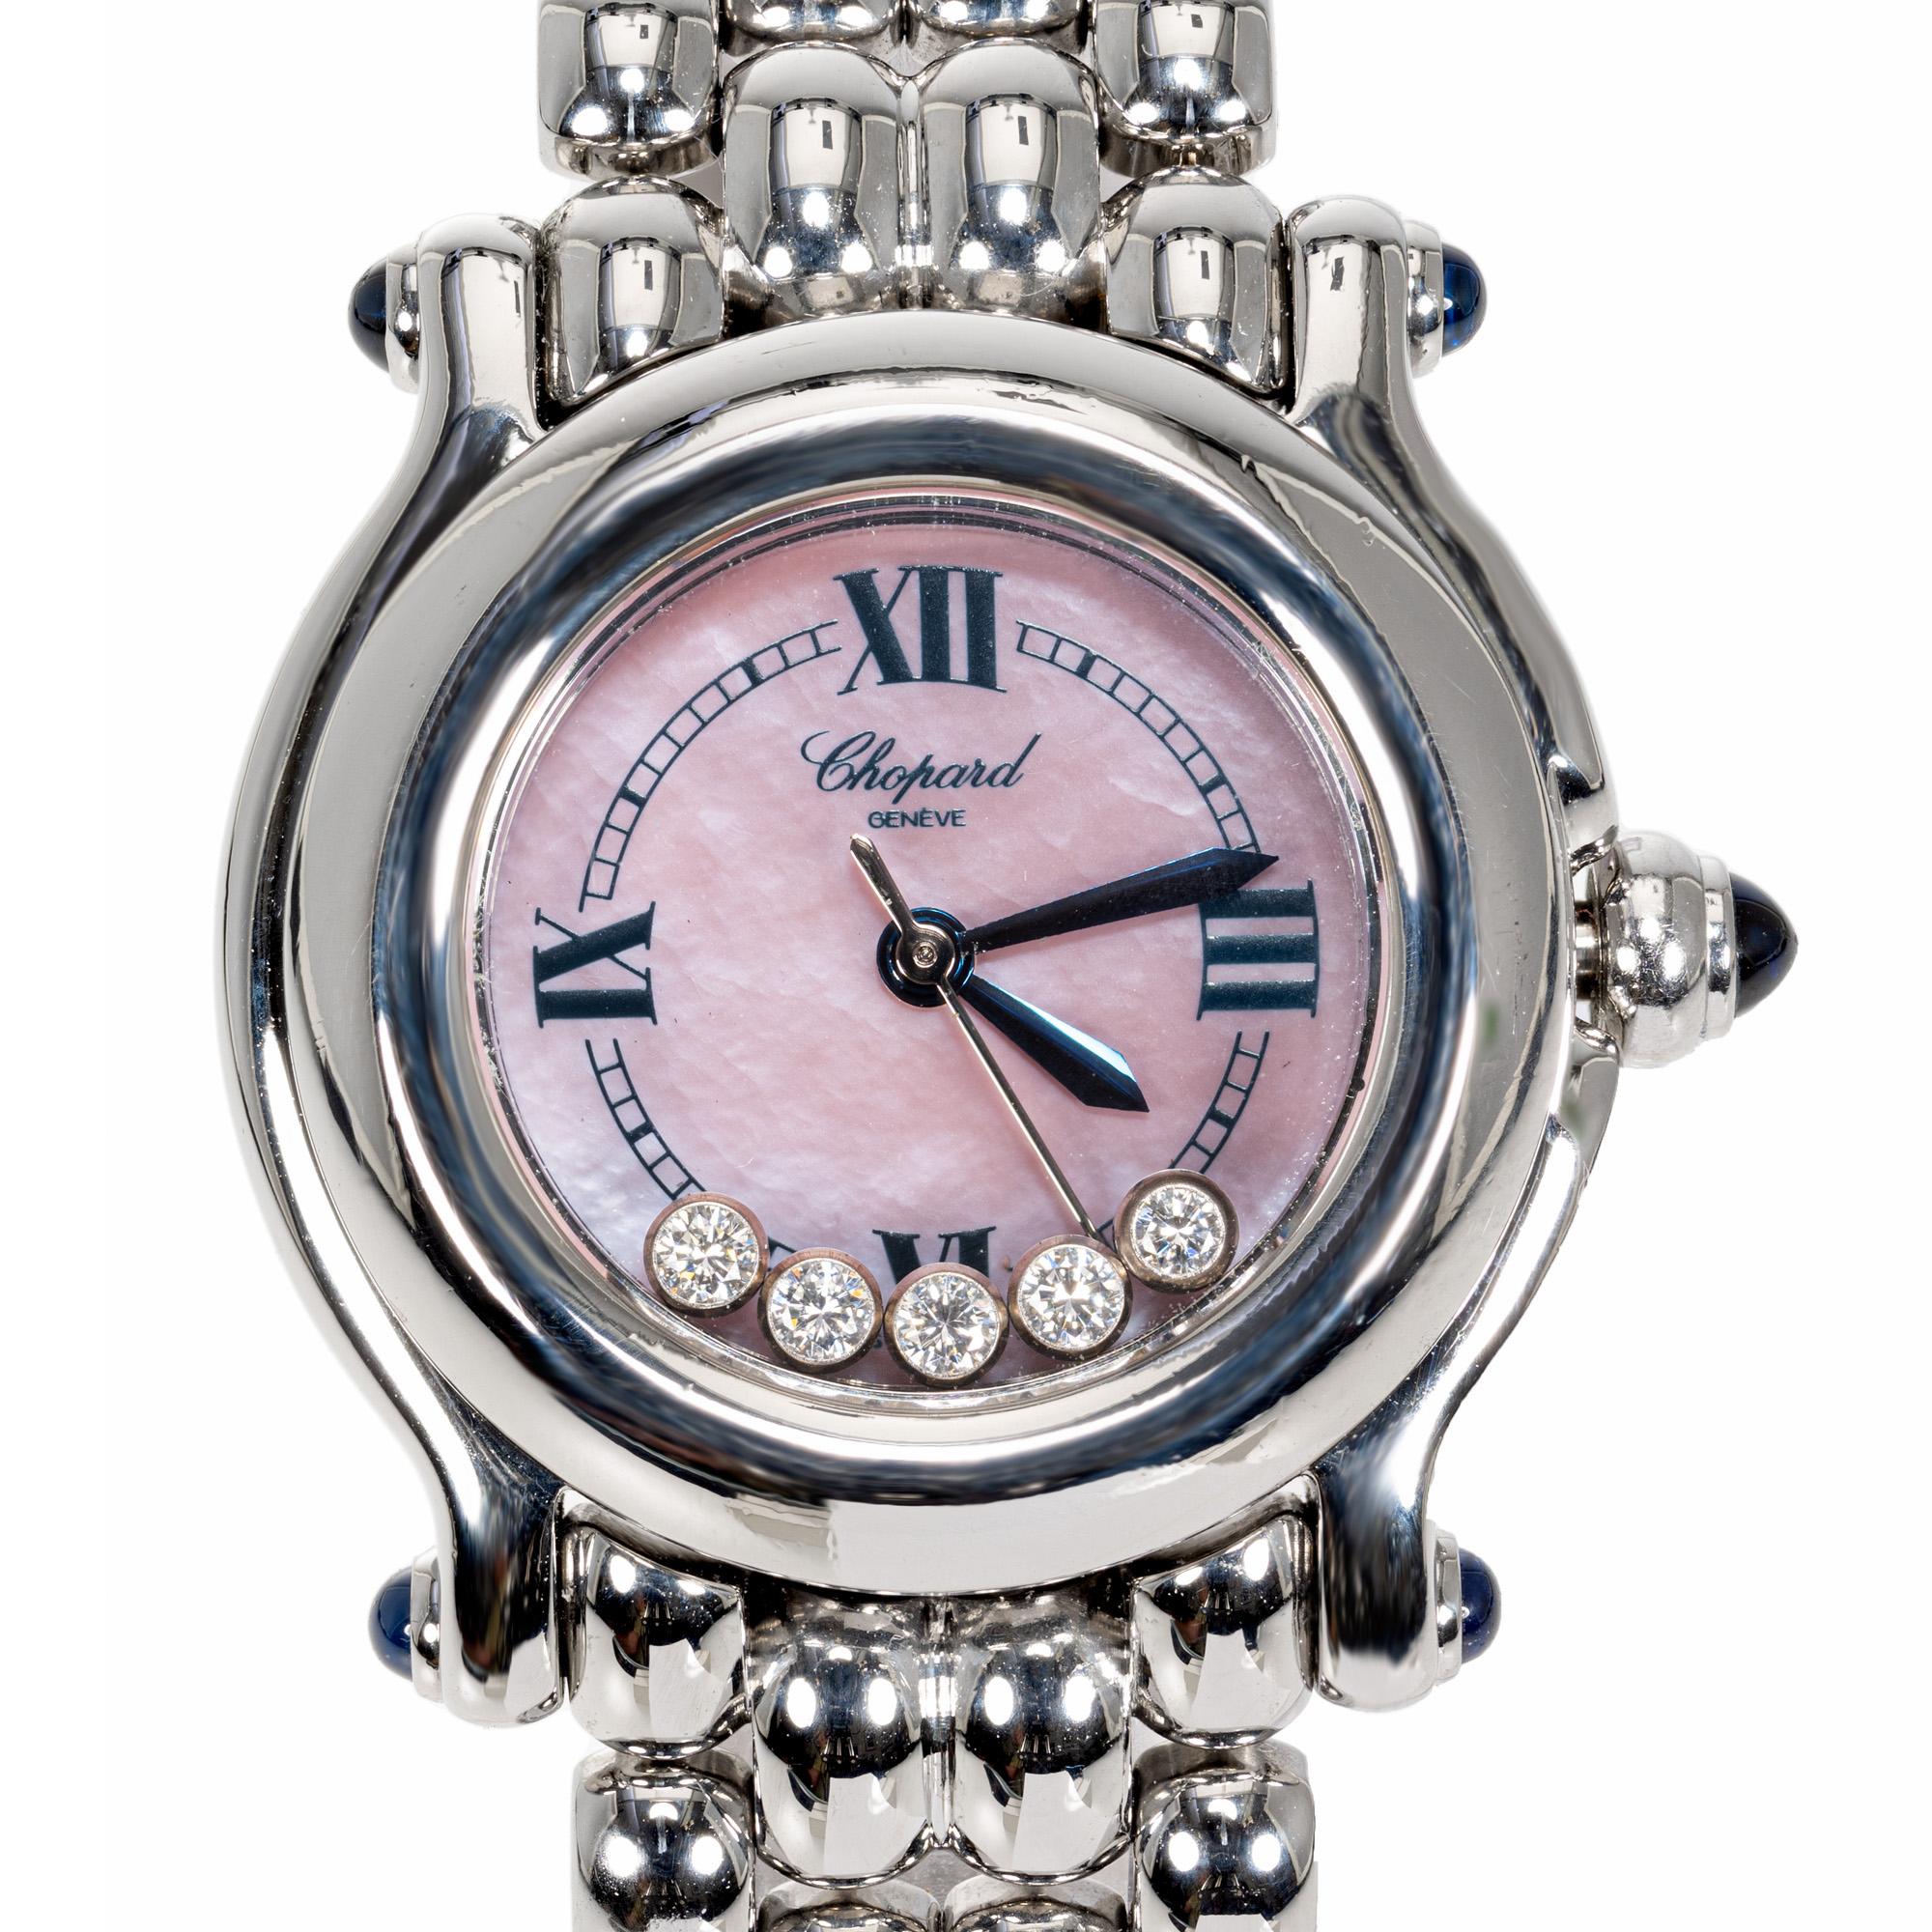 Iconic and Beautiful Ladies Chopard Happy Diamond Steel Quartz wristwatch with pink mother of pearl dial, with 5 round cut bezel set diamonds. Stainless steel bracelet. Circa 1995

Length: 28mm
Width: 26mm
Band width at case: 14mm
Case thickness: